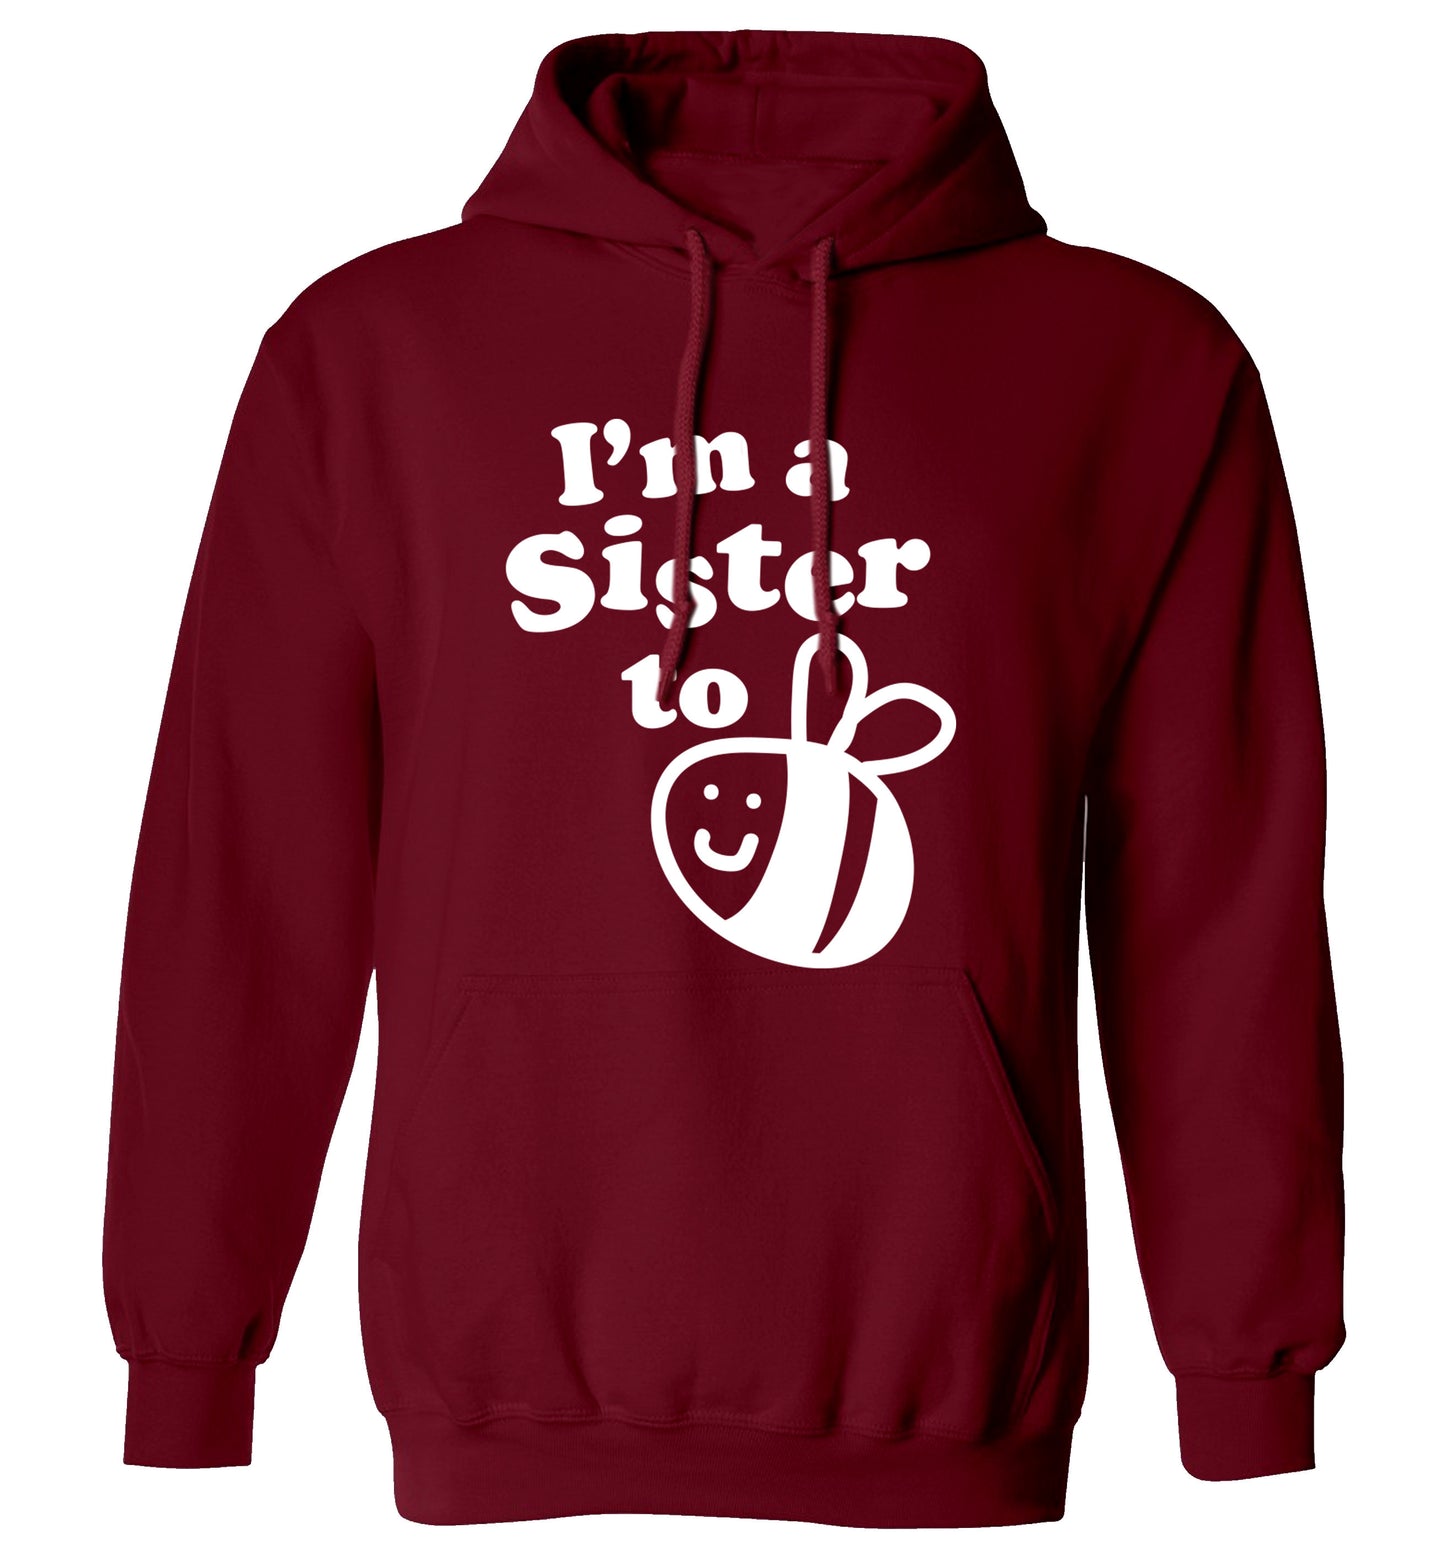 I'm a sister to be adults unisex maroon hoodie 2XL